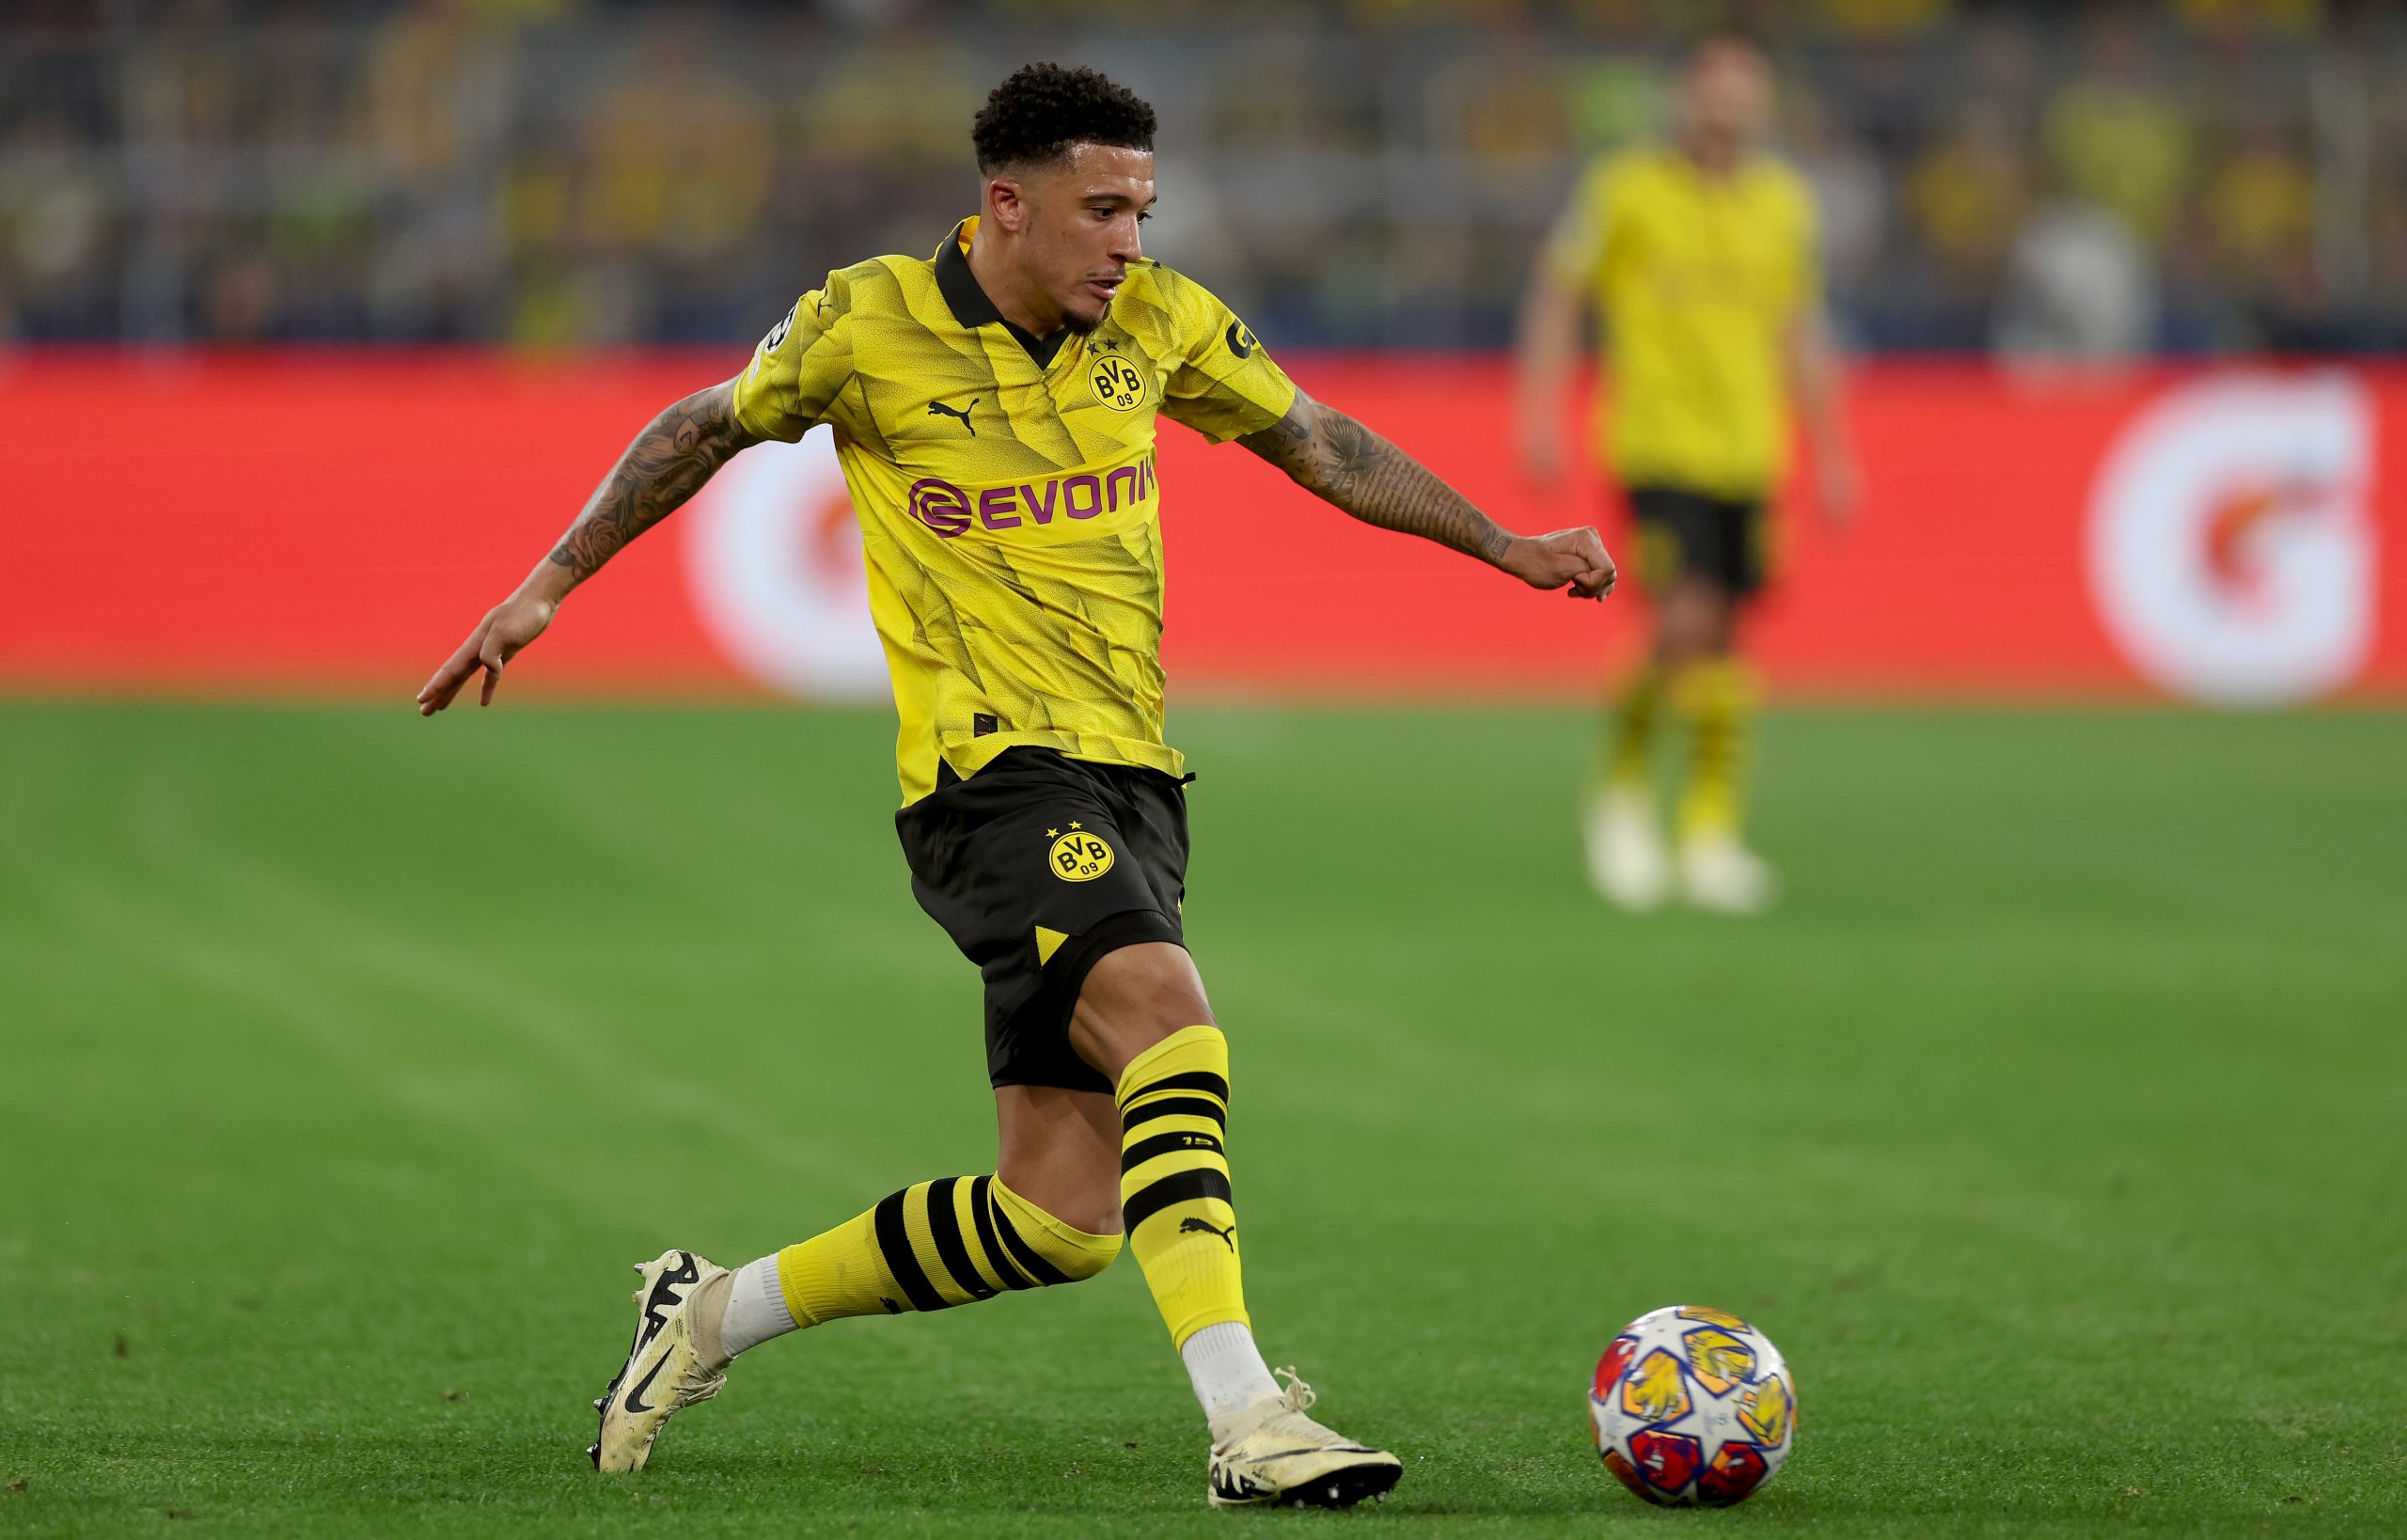 Ten Hag's comments suggest Manchester United's decision to send Jadon Sancho on loan has worked out.